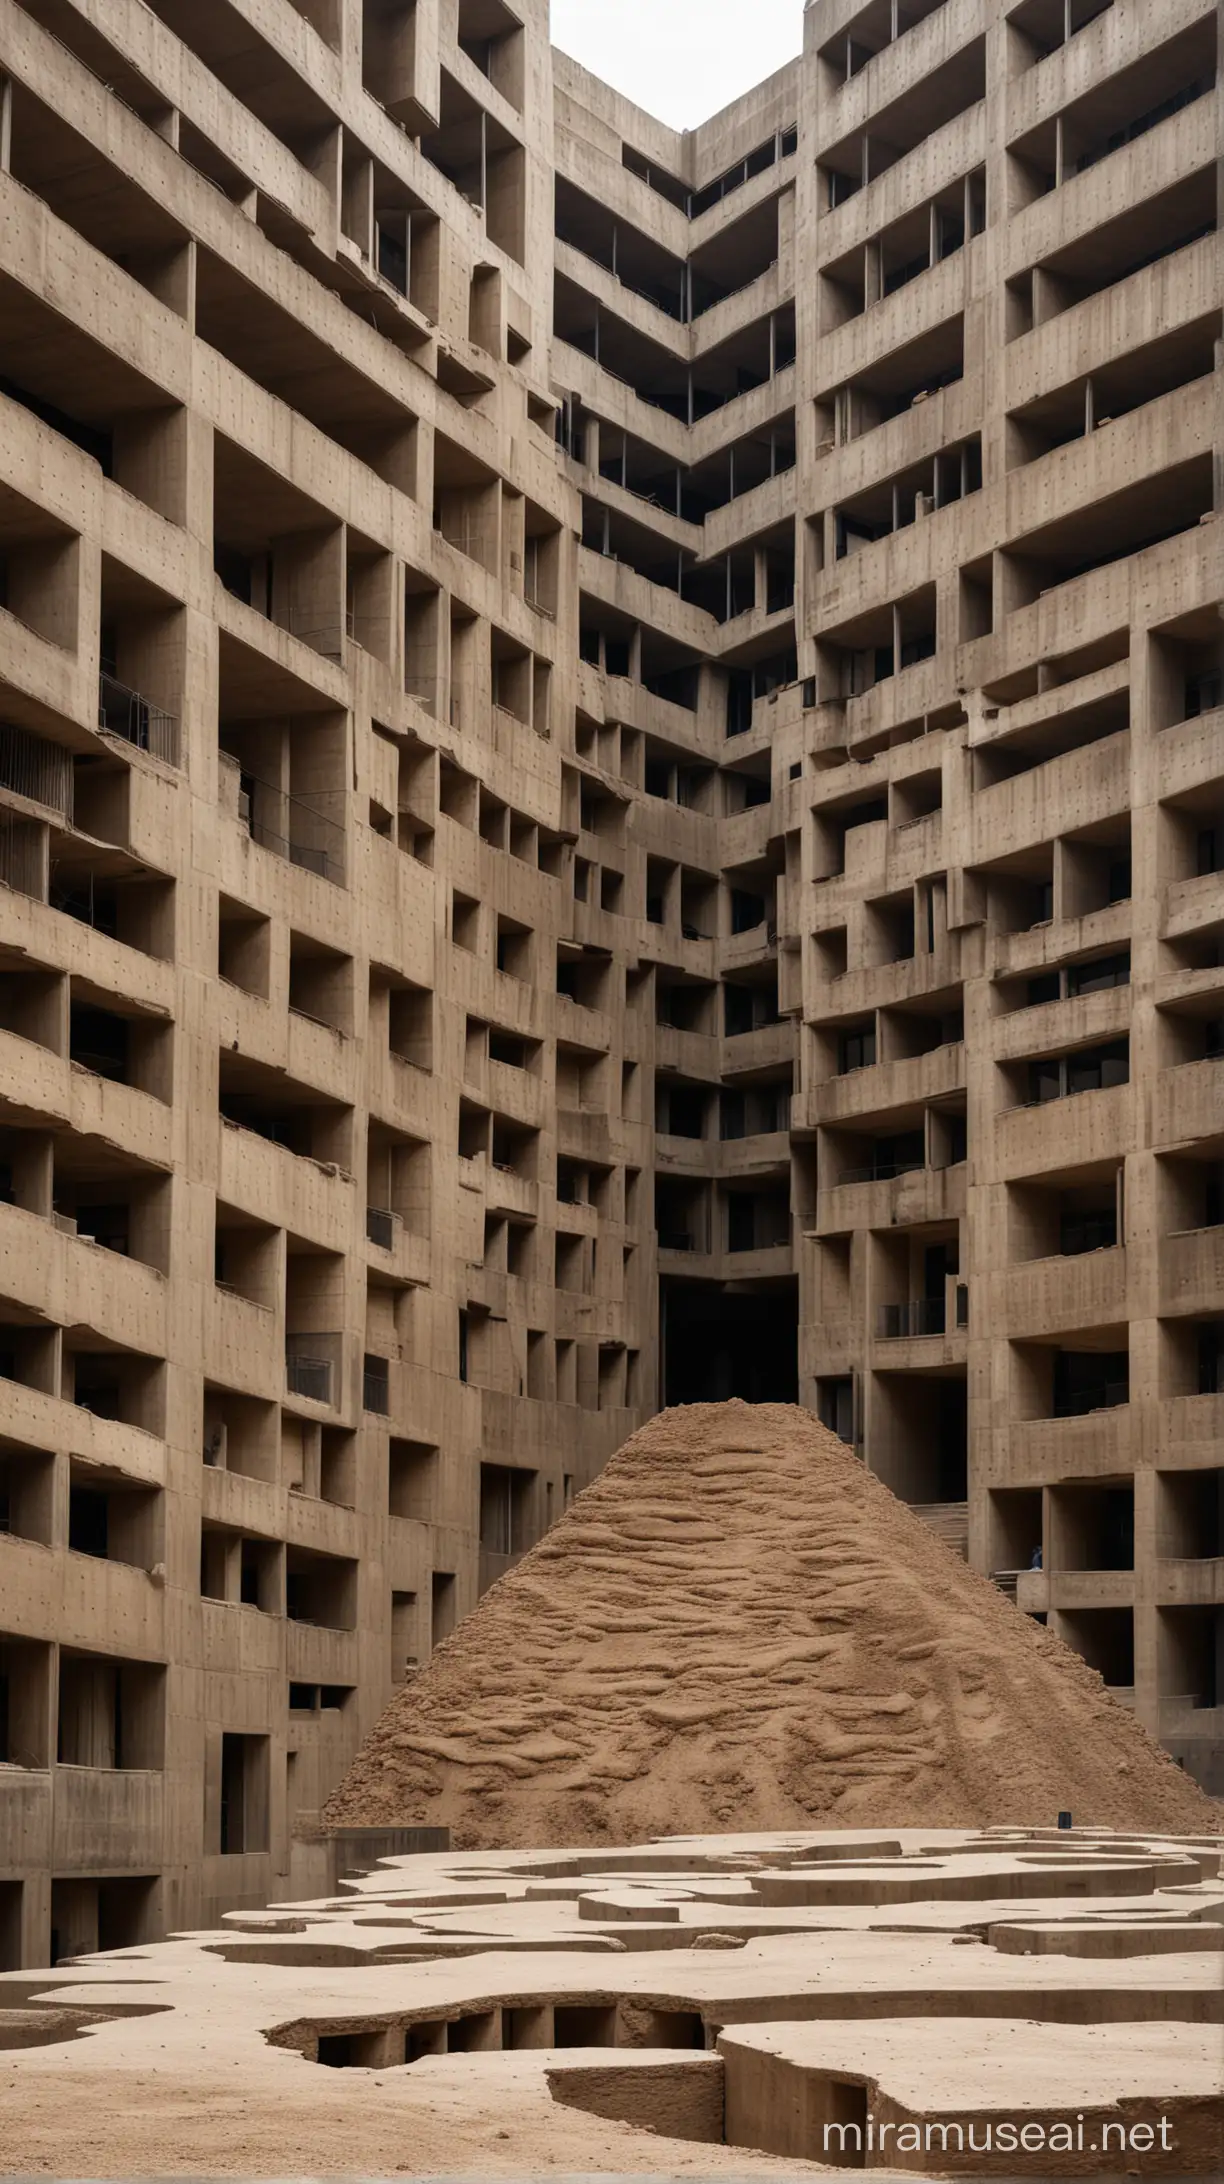 abstract shape, unstructured, massive building, open air, concrete, rammed earth, cast concrete, dirt, black concrete surrounding, brooding, hovering, no people, building, multi-story, structure, wabi sabi Maintain a 6:19 aspect ratio.